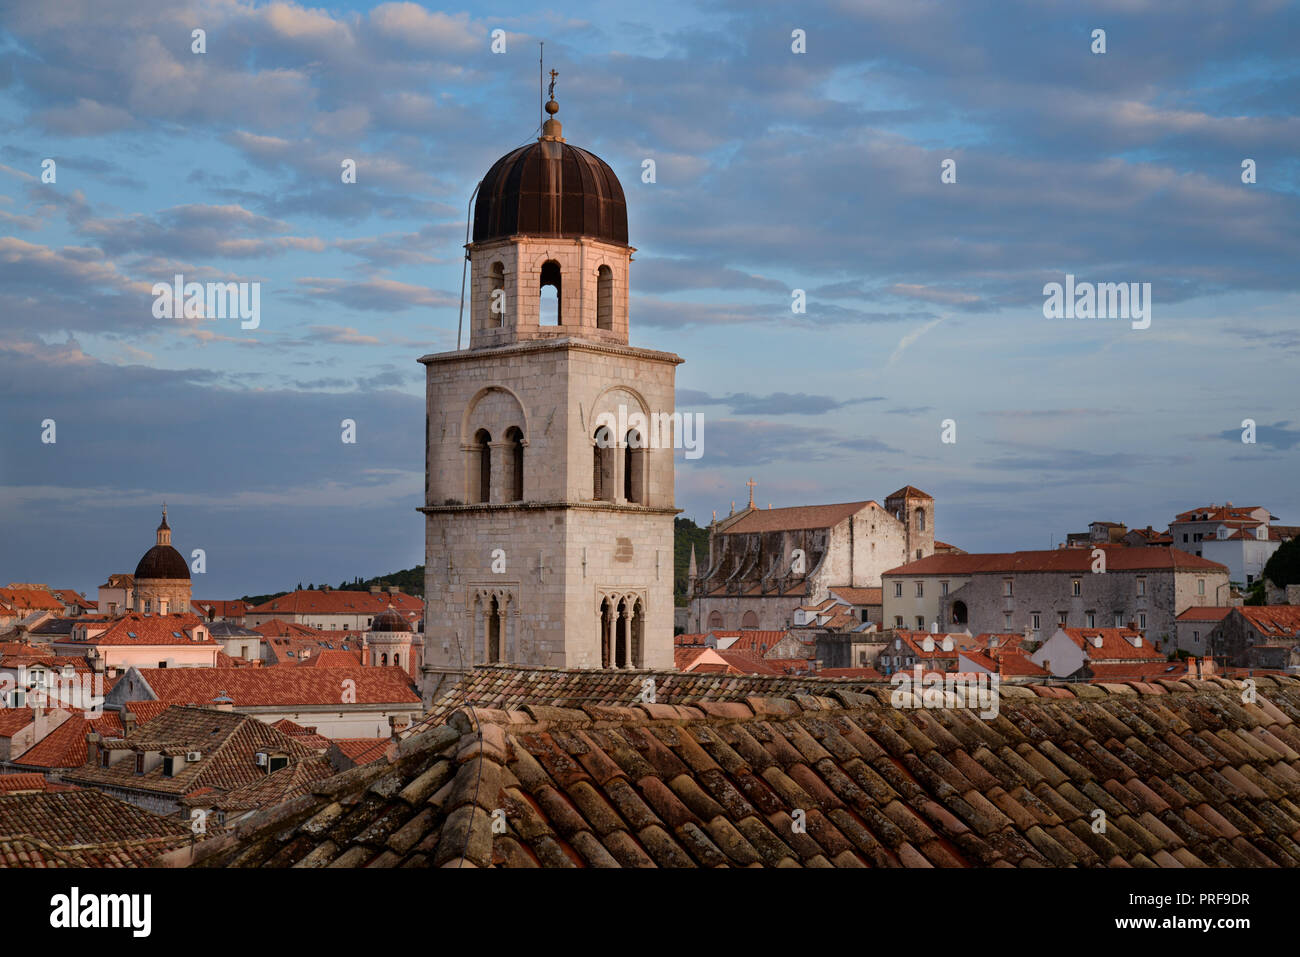 The Bell Tower of the Franciscan Monastery with Saint Ignatius Church beyond, Old Town of Dubrovnik, Croatia Stock Photo